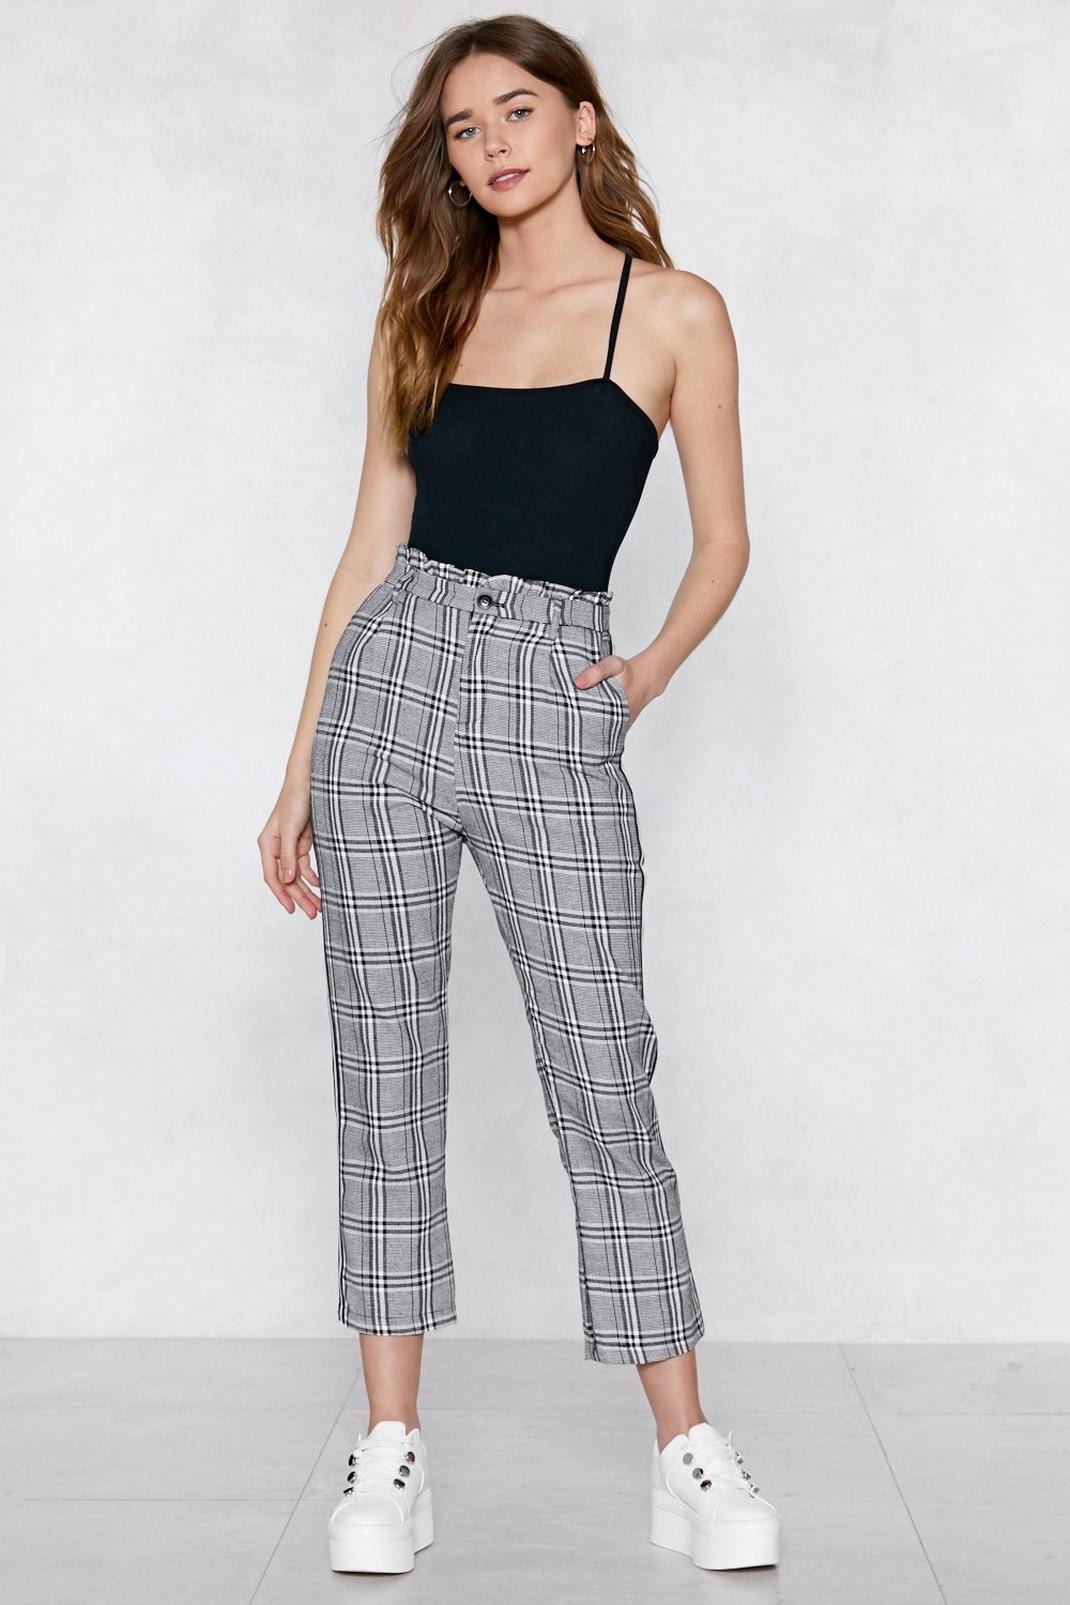 By My Side Plaid Pants image number 1